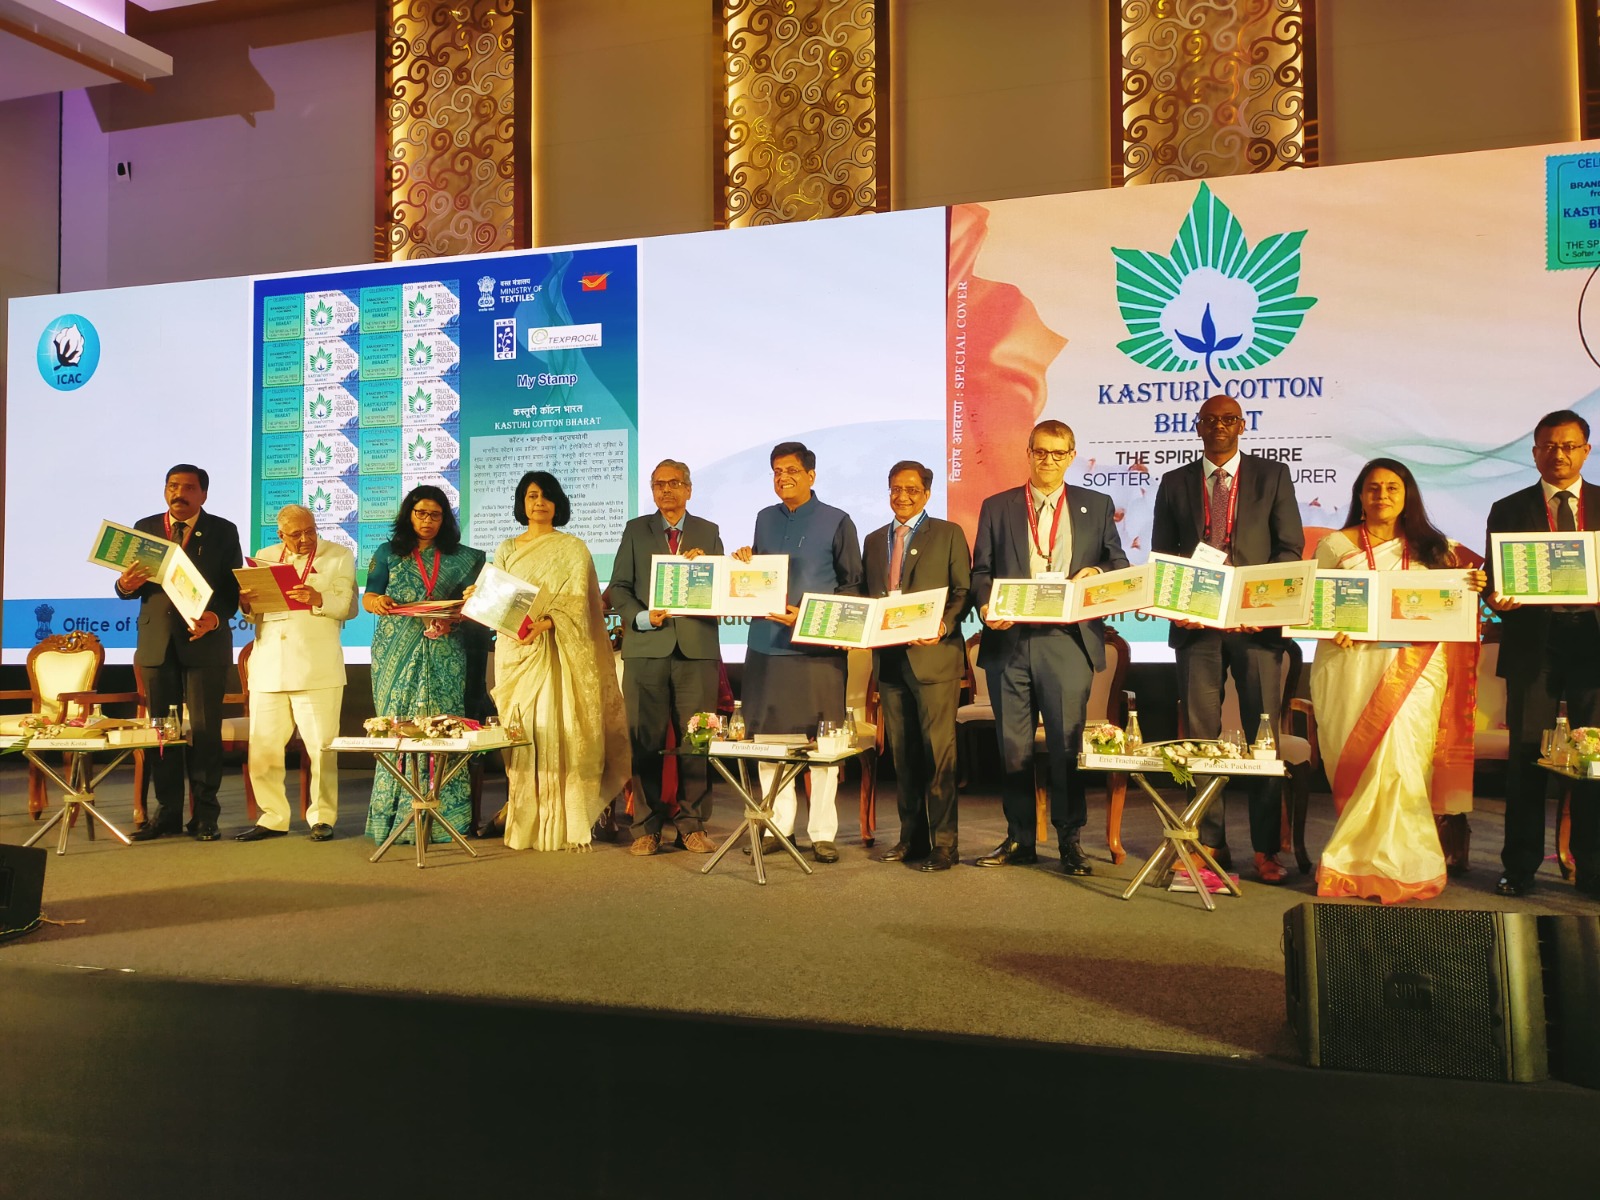 Hon’ble Union Minister, Shri Piyush Goyal ji, releasing the commemorative stamp on Kasturi Cotton Bharat at the 81th Plenary Meeting of the (ICAC) held on 2nd Dec 2023 at the Jio Convention Centre, Mumbai.